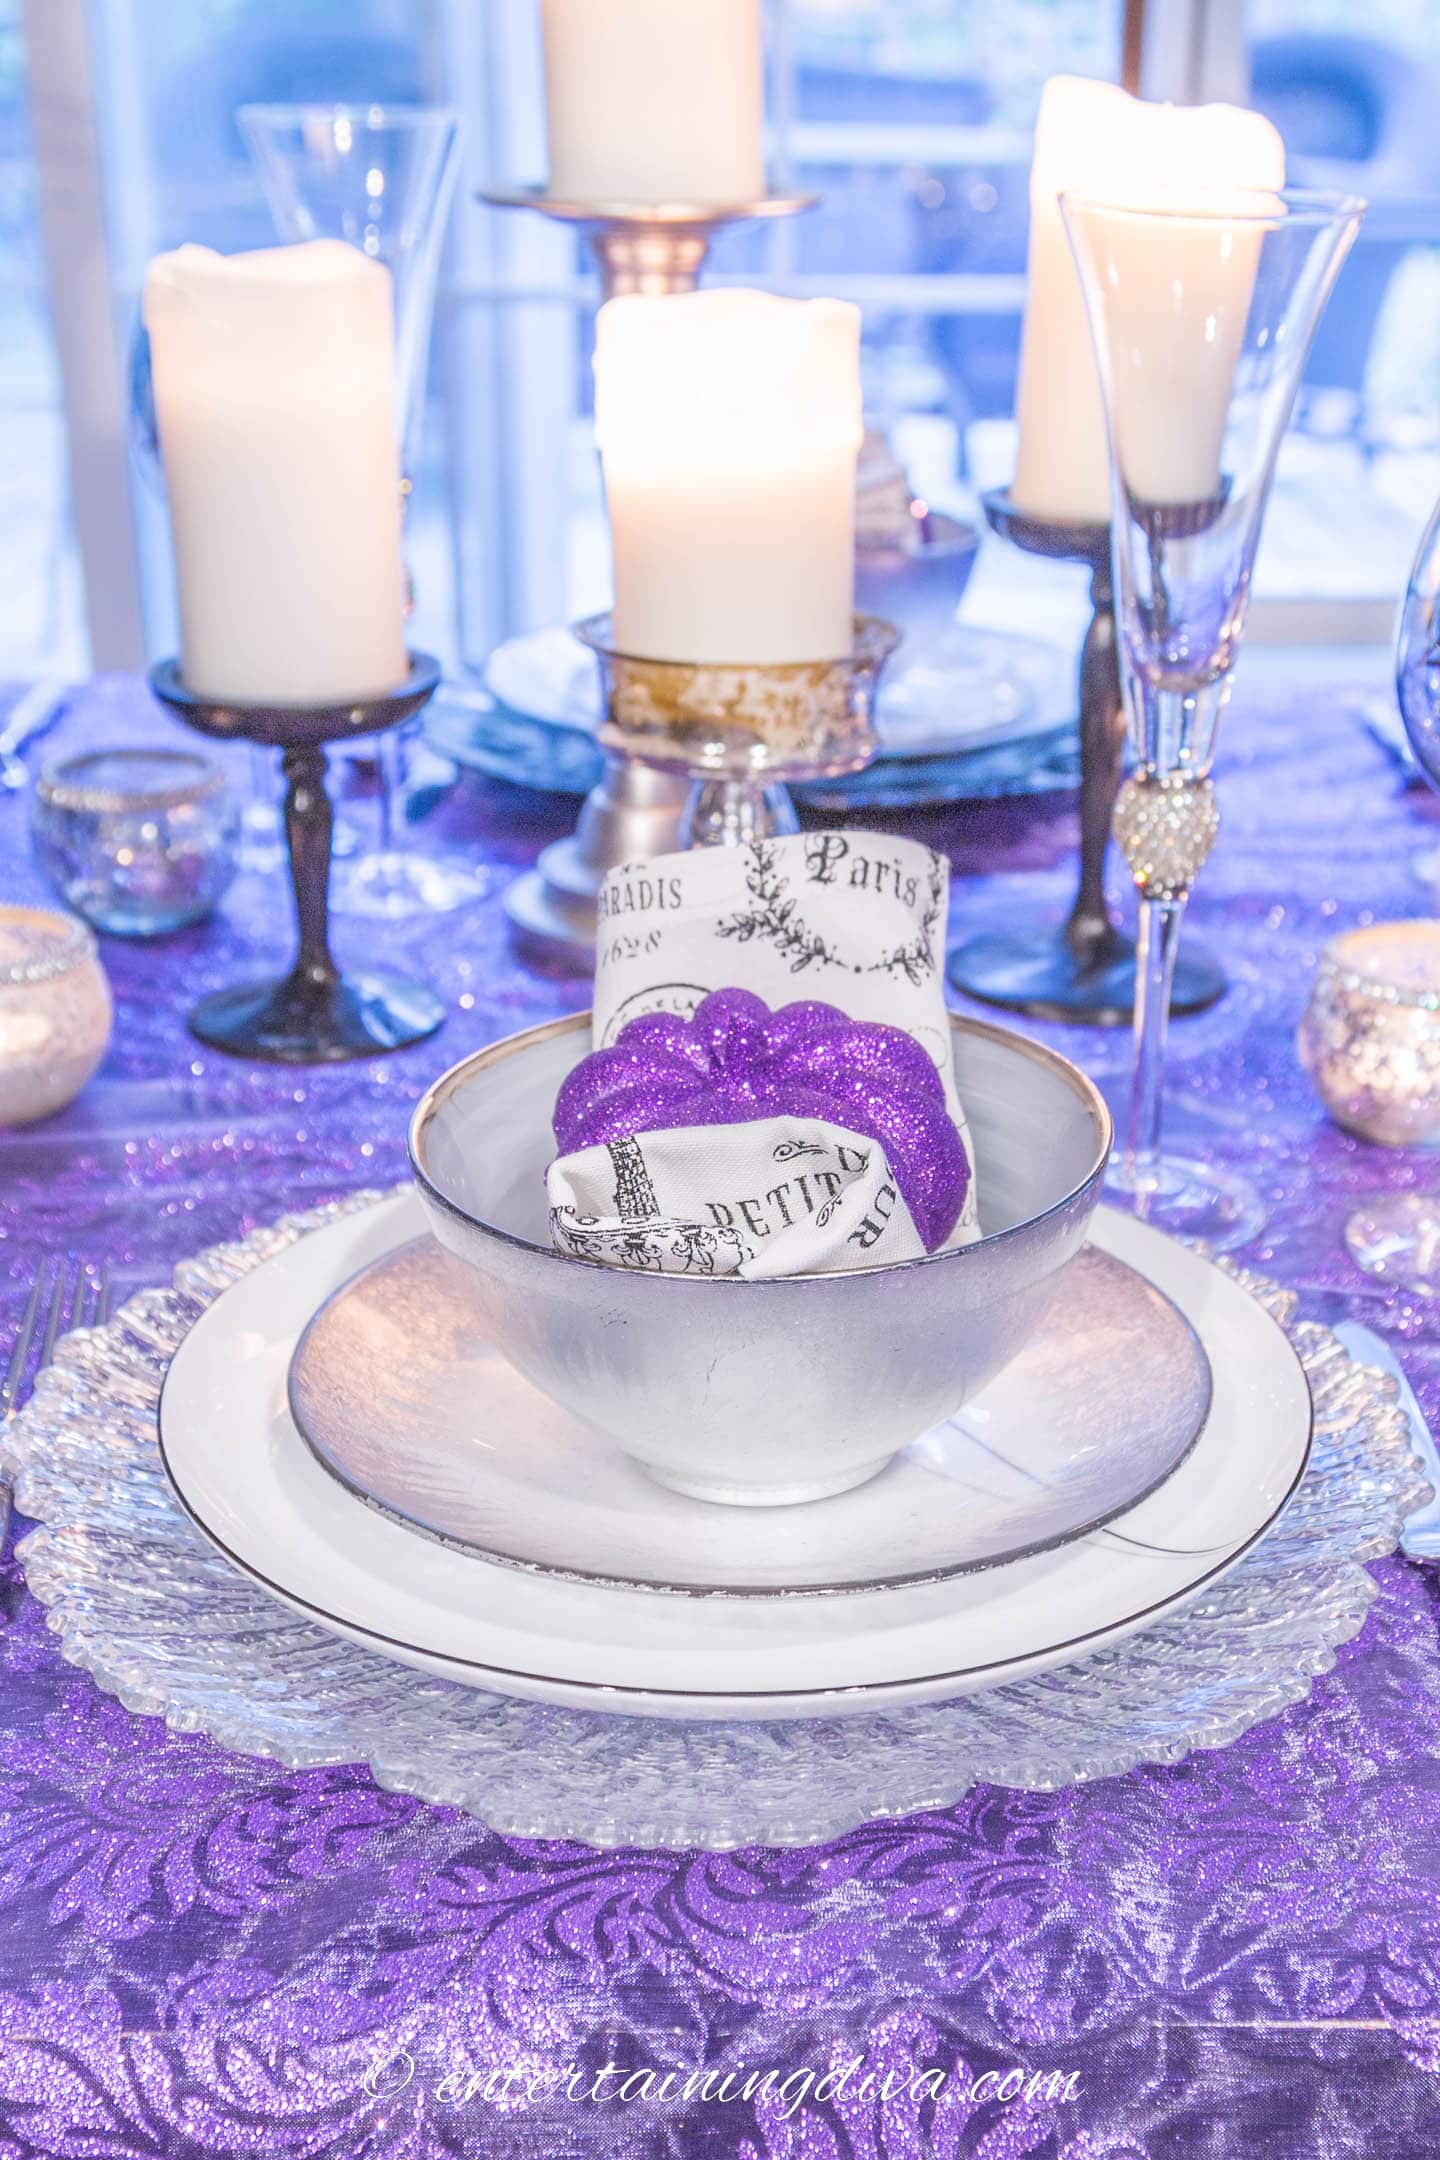 Place setting with silver and white dishes, black and white napkin and small purple pumpkin in front of some white candles